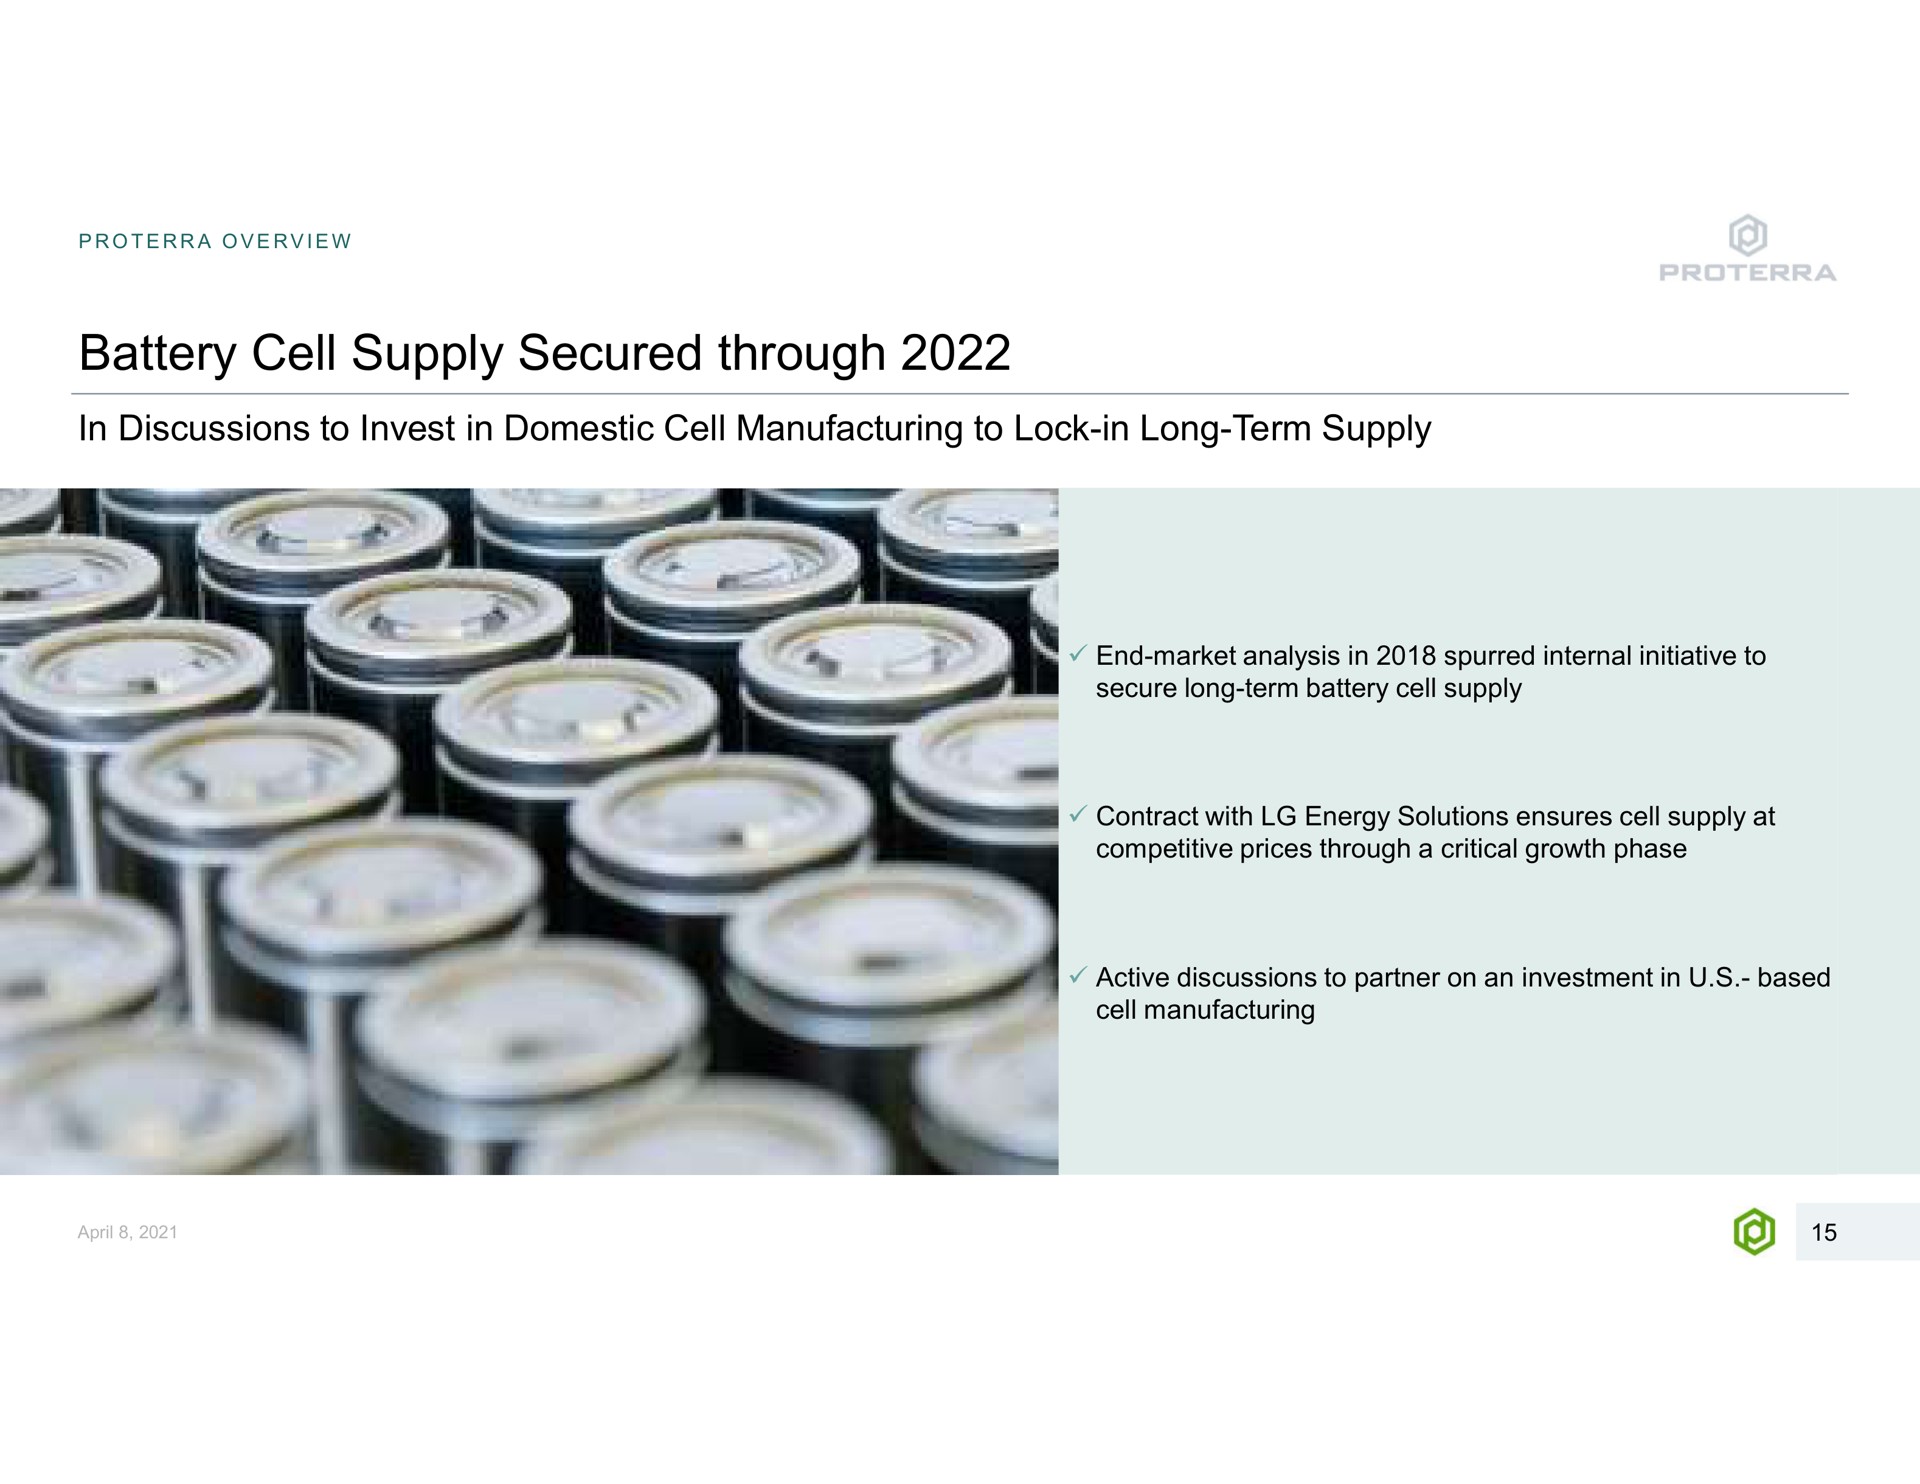 battery cell supply secured through overview in discussions to invest in domestic manufacturing to lock in long term a end market analysis in spurred internal initiative to secure long term contract with energy solutions ensures at competitive prices a critical growth phase manufacturing active discussions to partner on an investment in based | Proterra